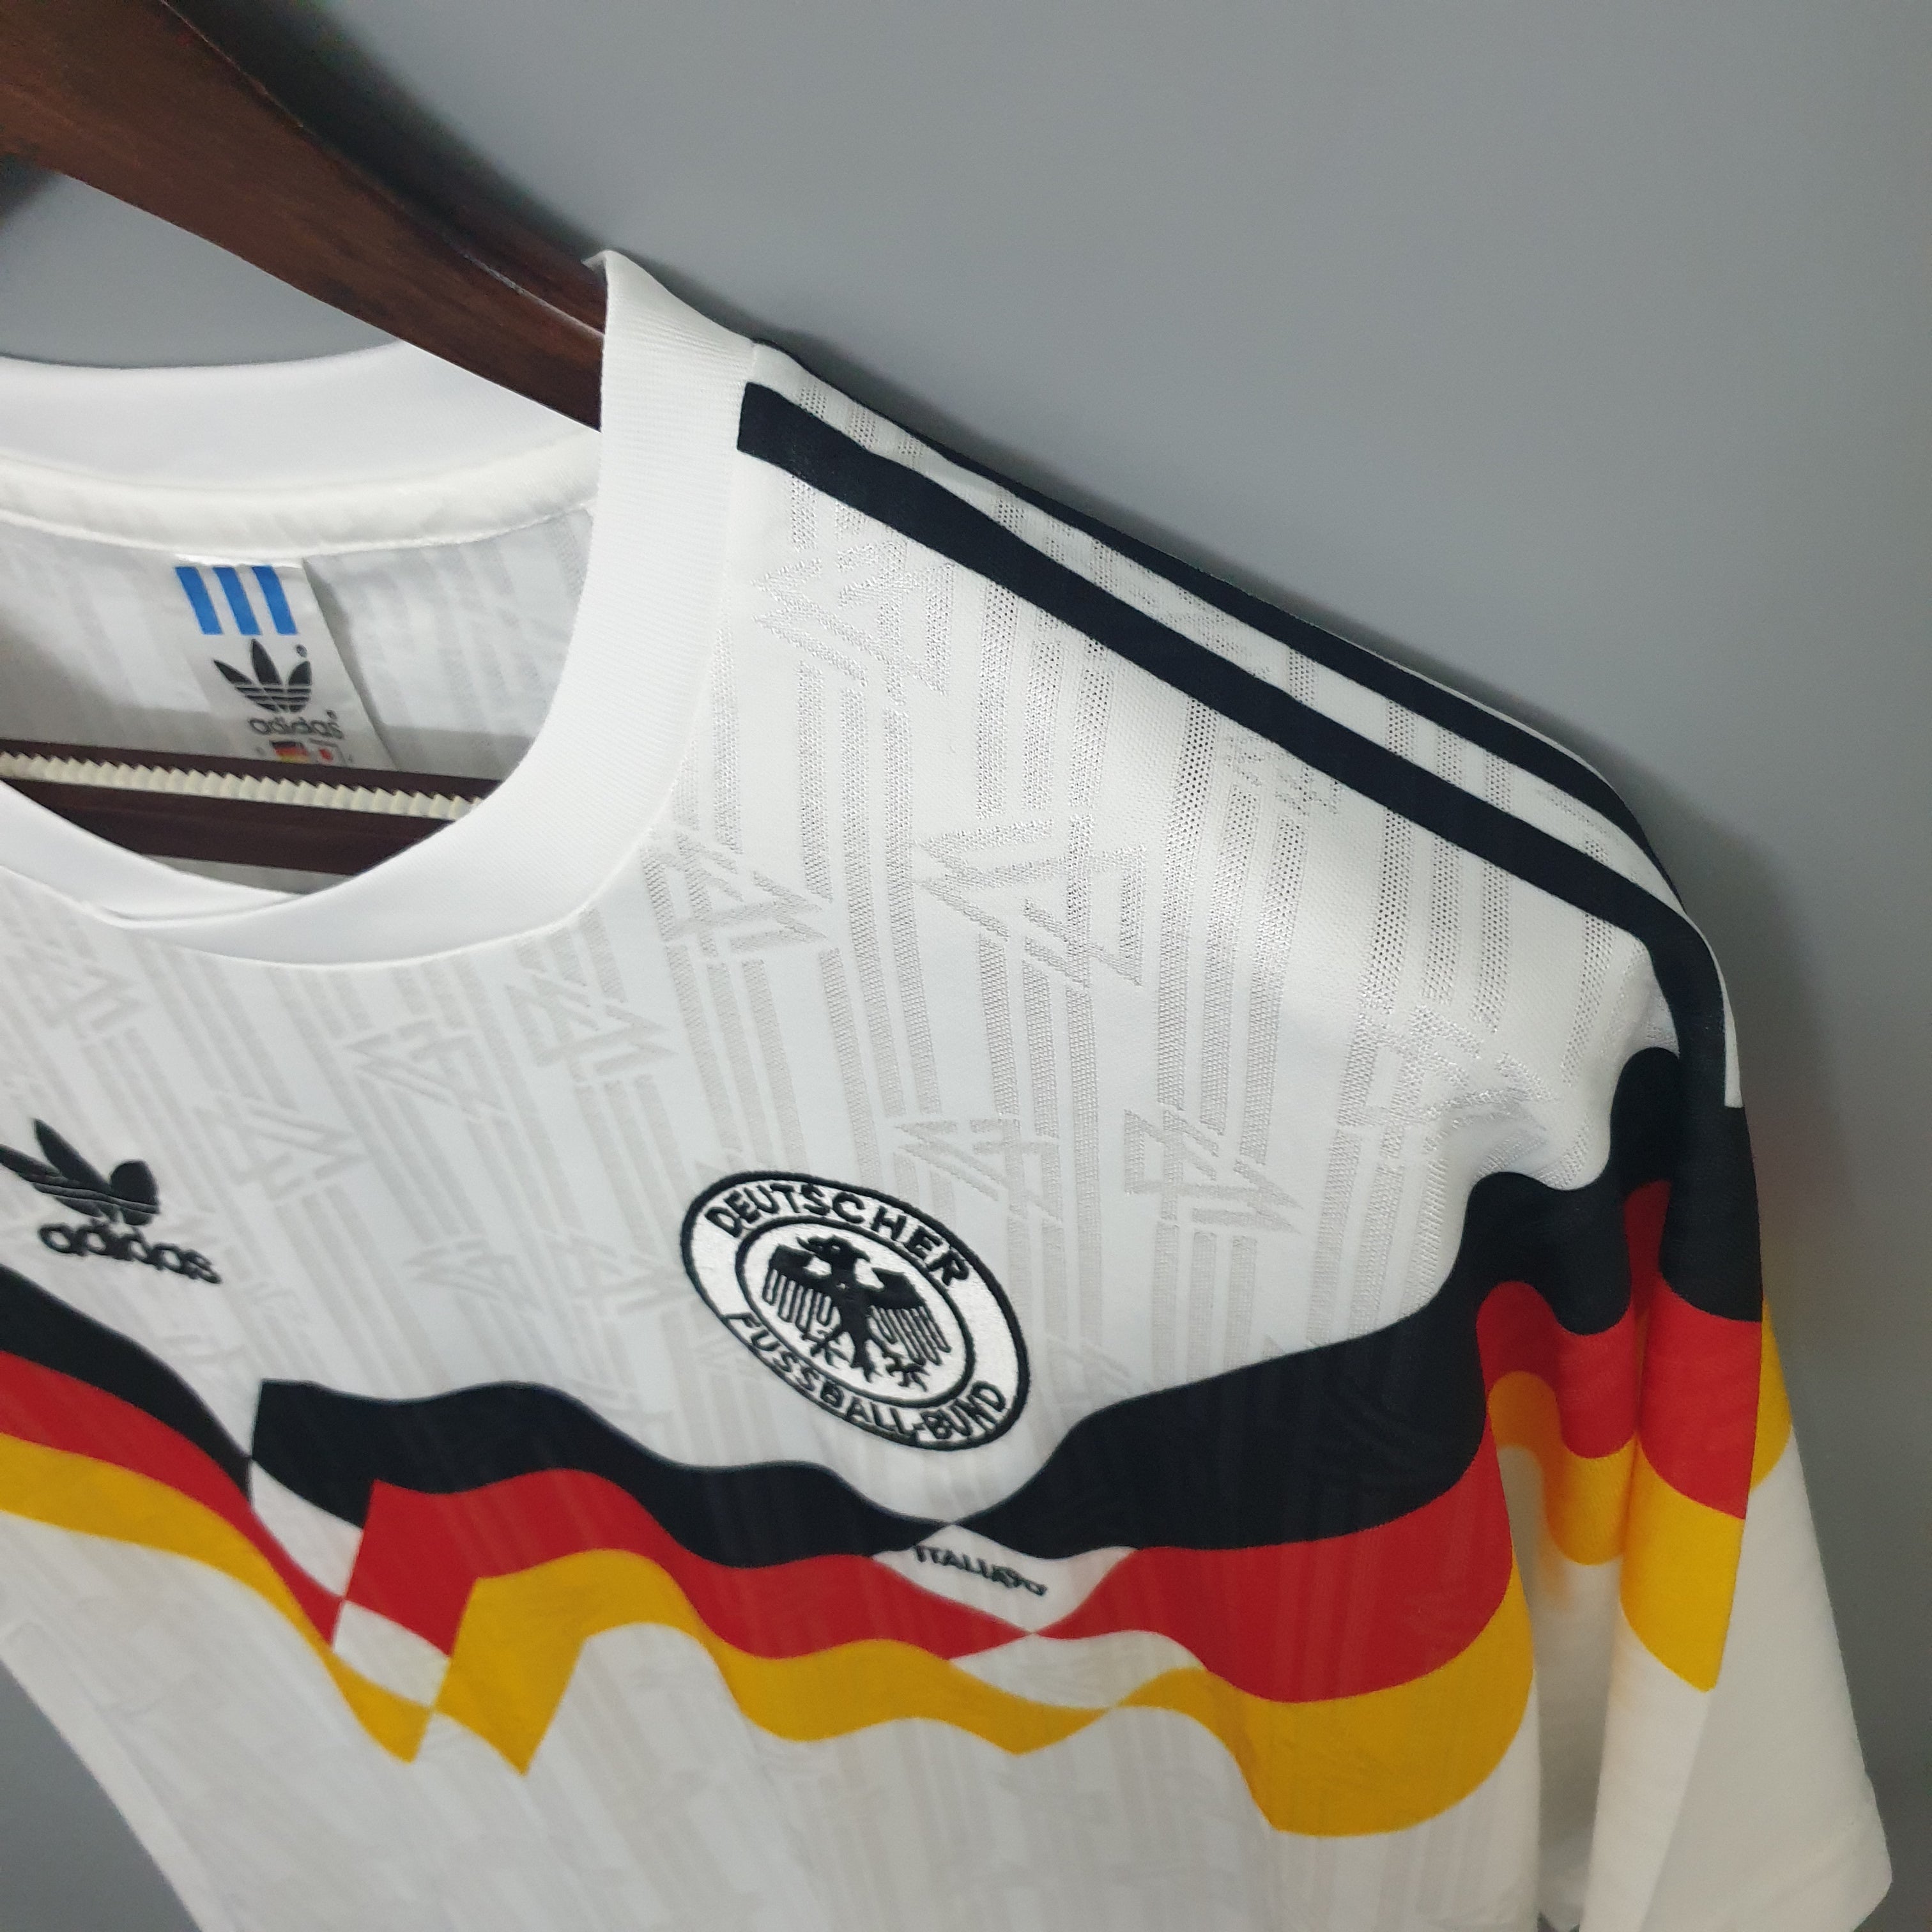 Germany 1990 World Cup Home Jersey